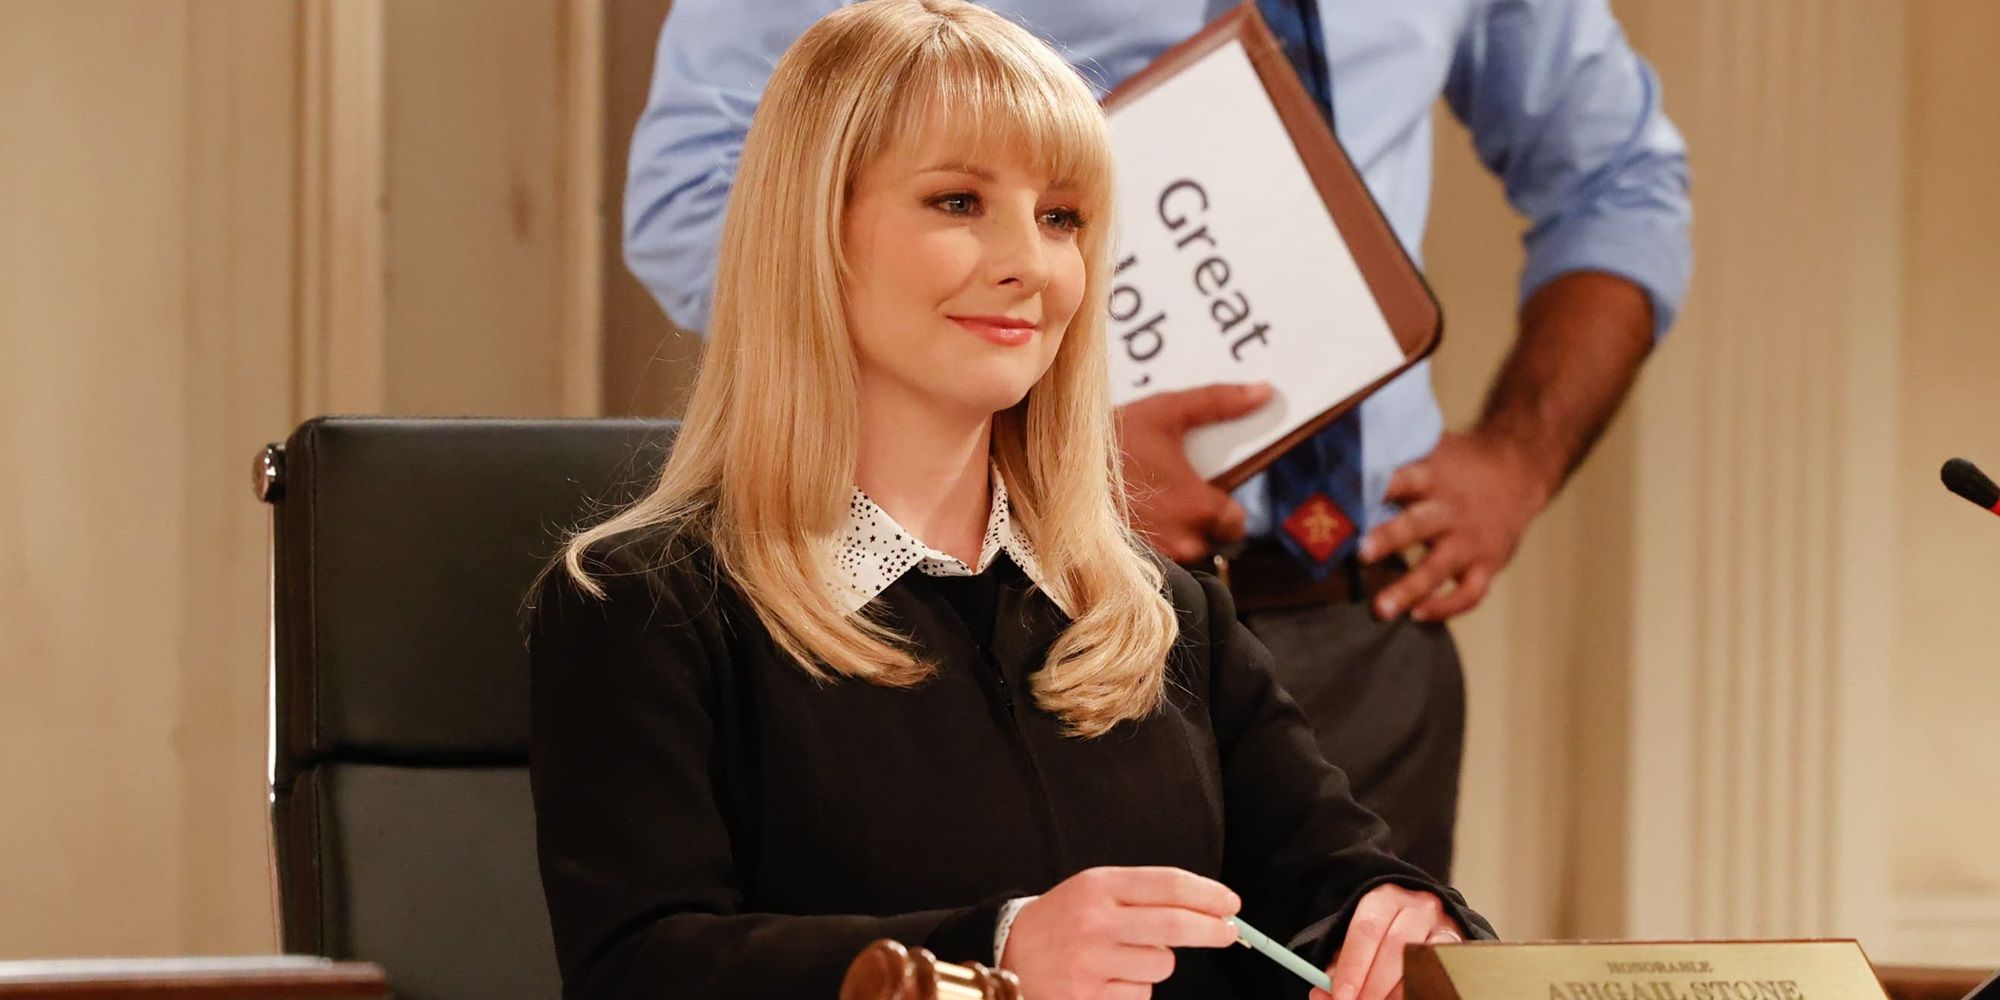 How Night Court Season 2's Ending Cliffhanger Will Impact Season 3 Teased By Melissa Rauch